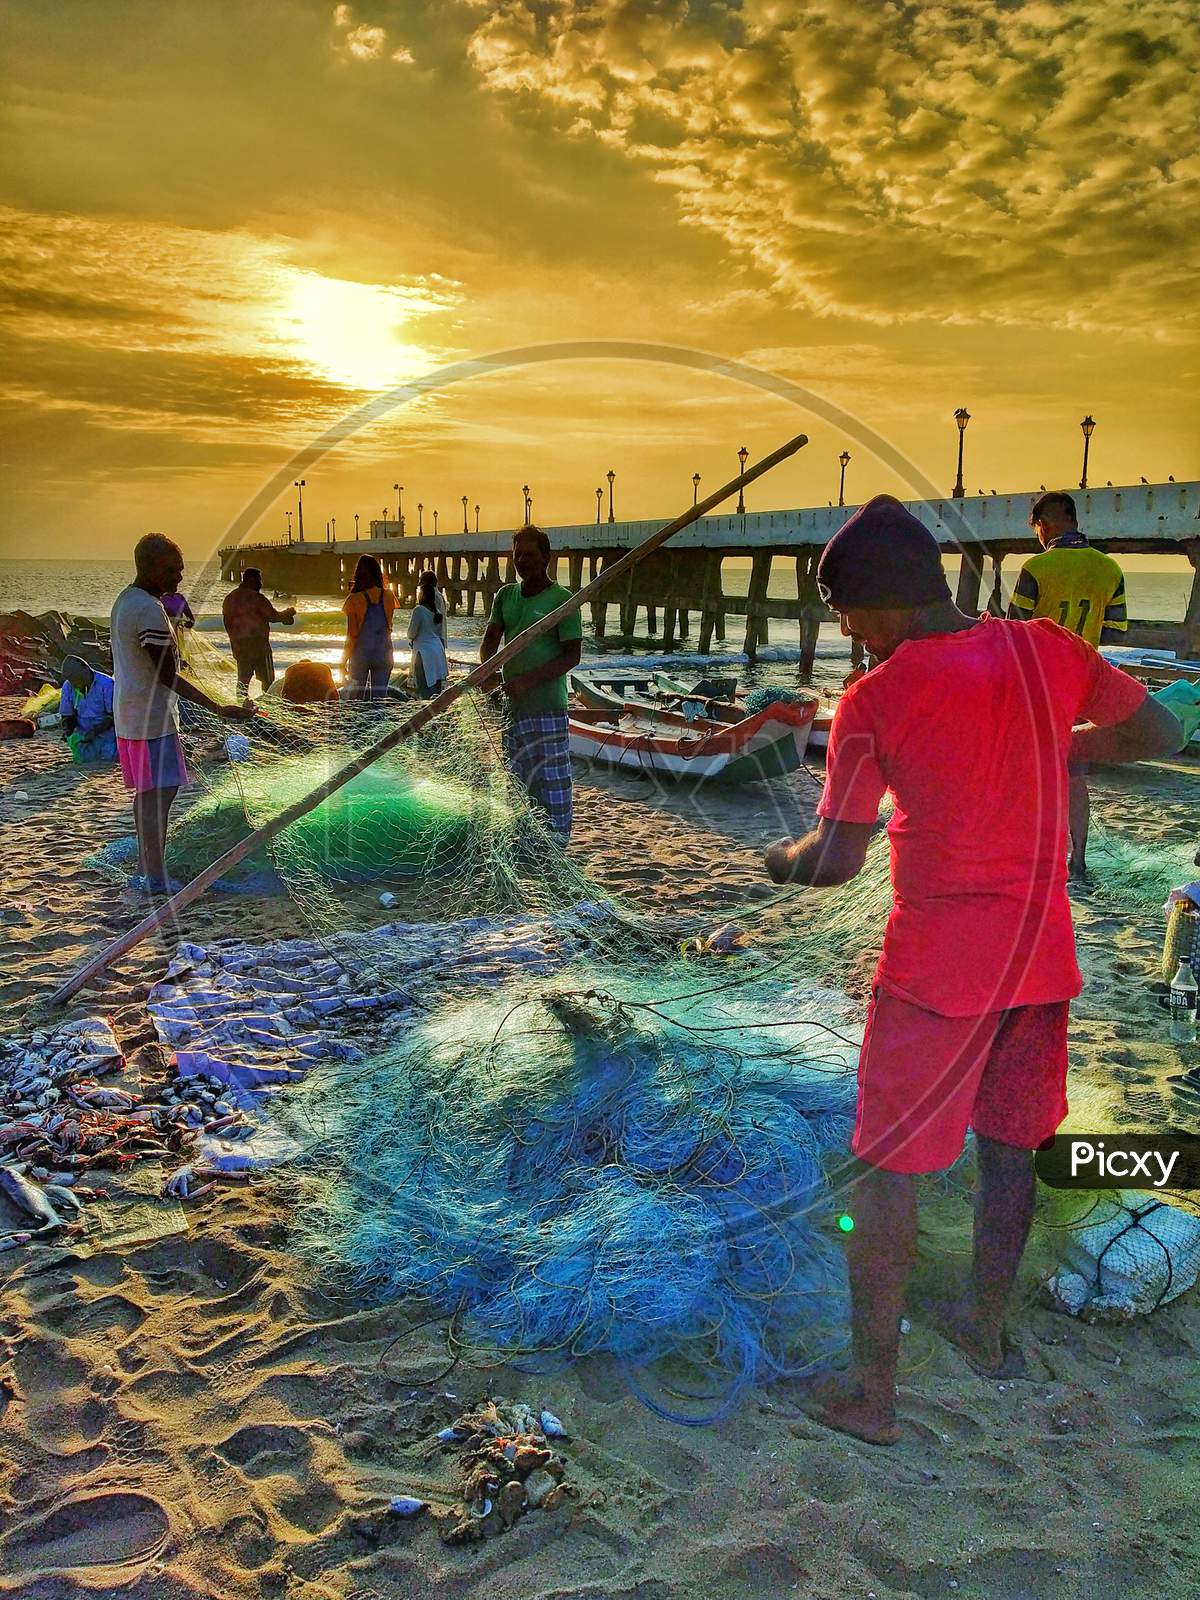 Fisherman In an Beach With Fishing Nets